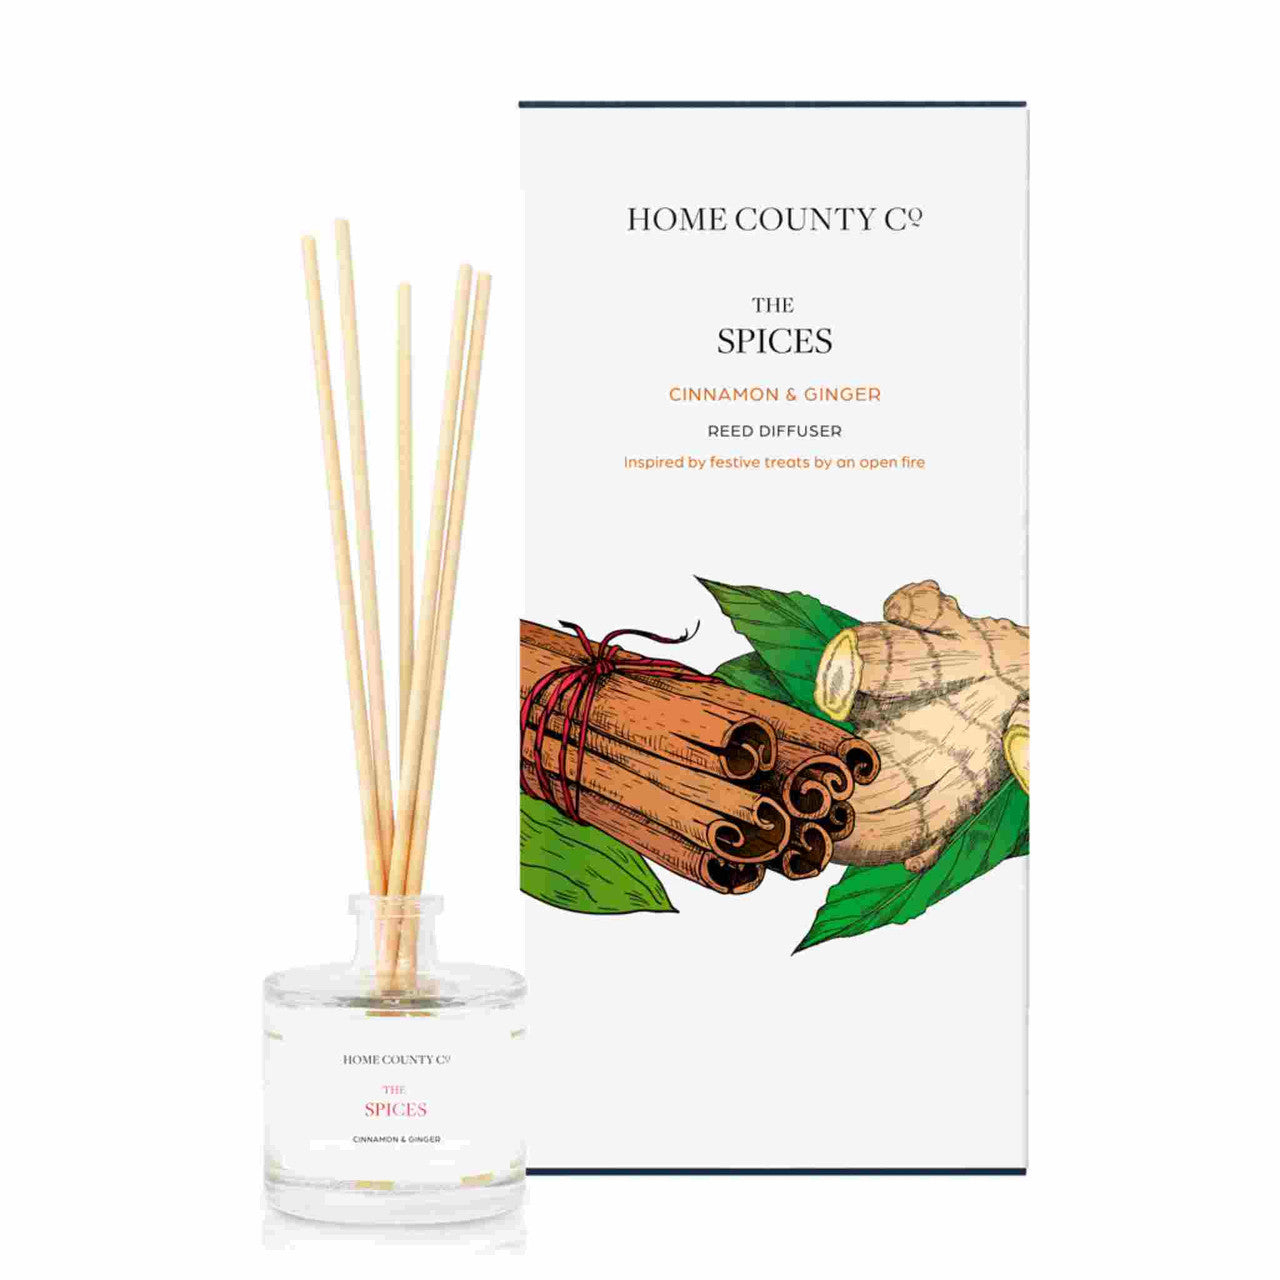 The Spices - Cinnamon & Ginger Reed Diffuser by Home County Candle Co.